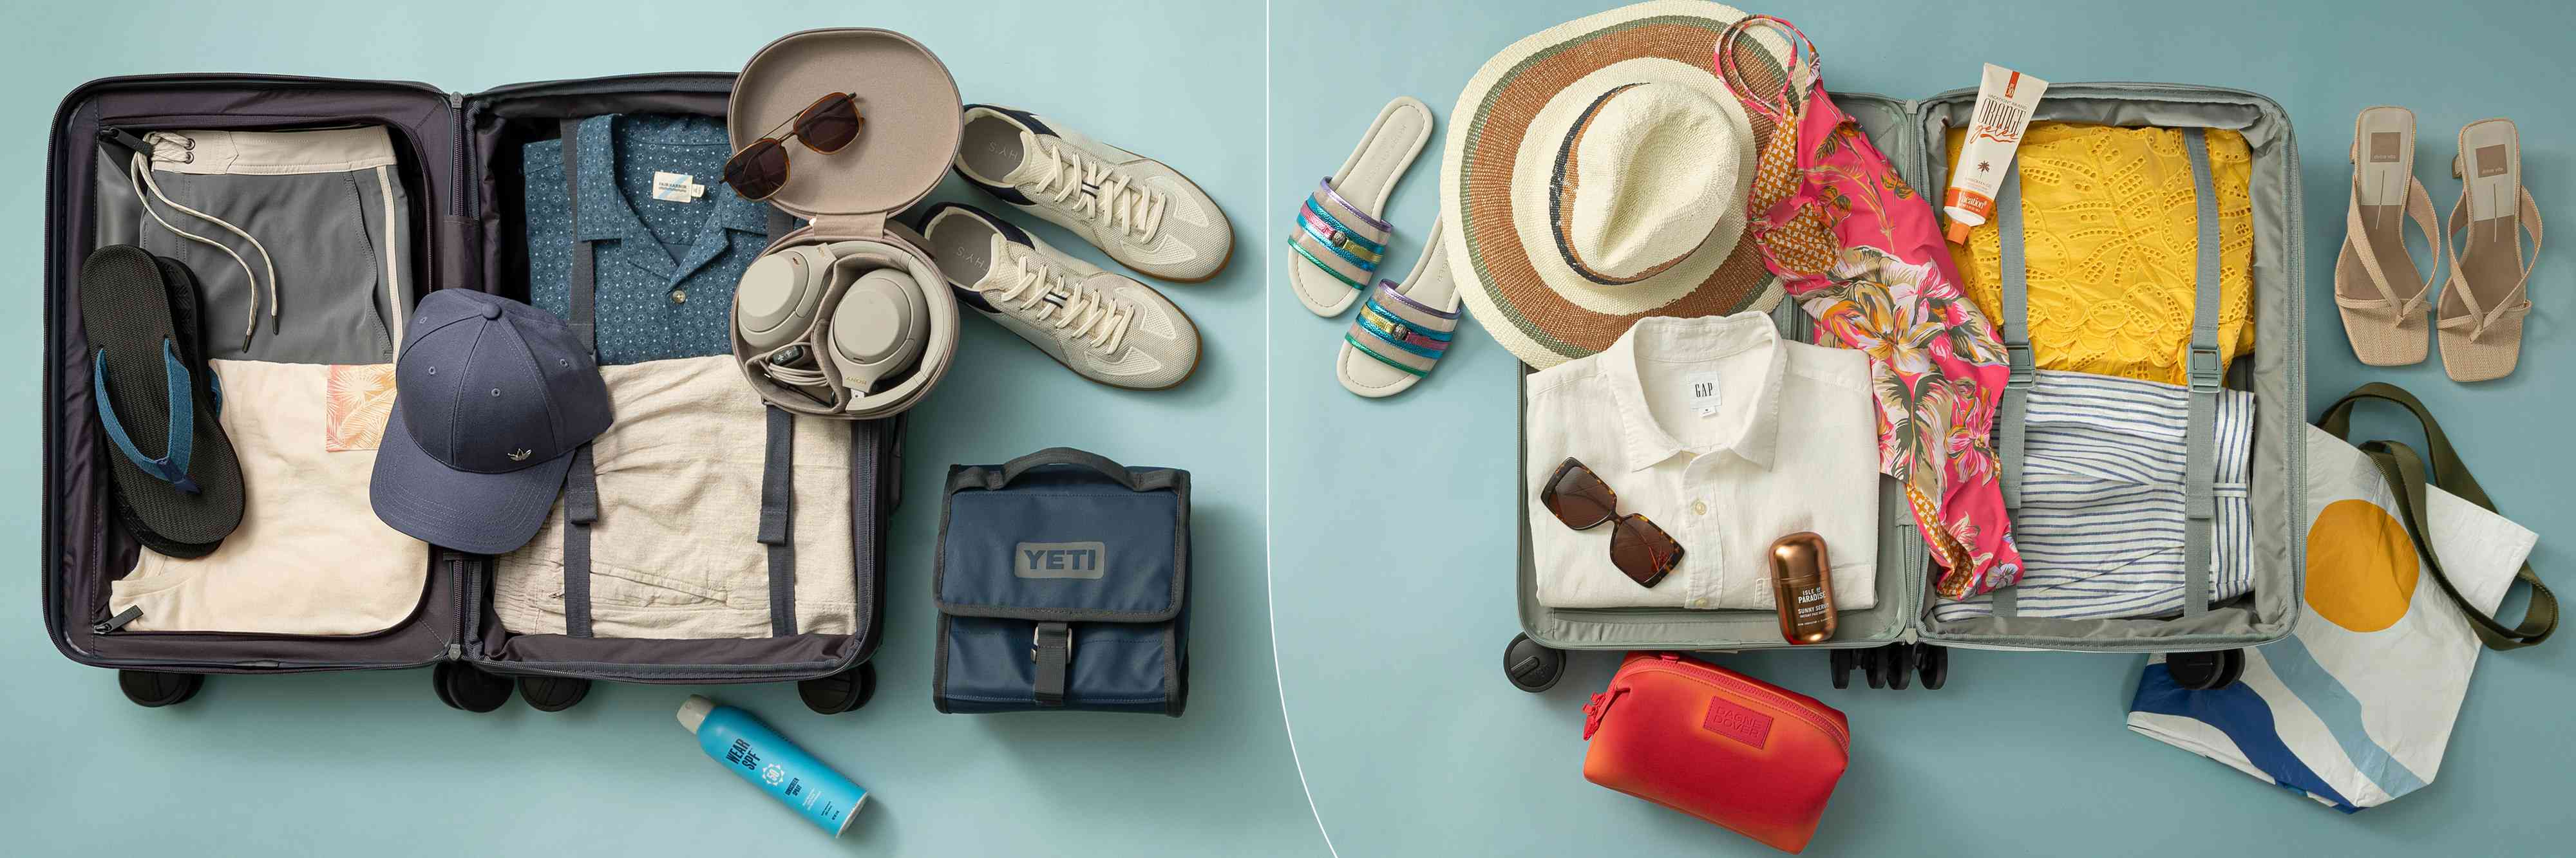 A PEOPLE StyleWatch Editor’s Guide to Packing for Vacation